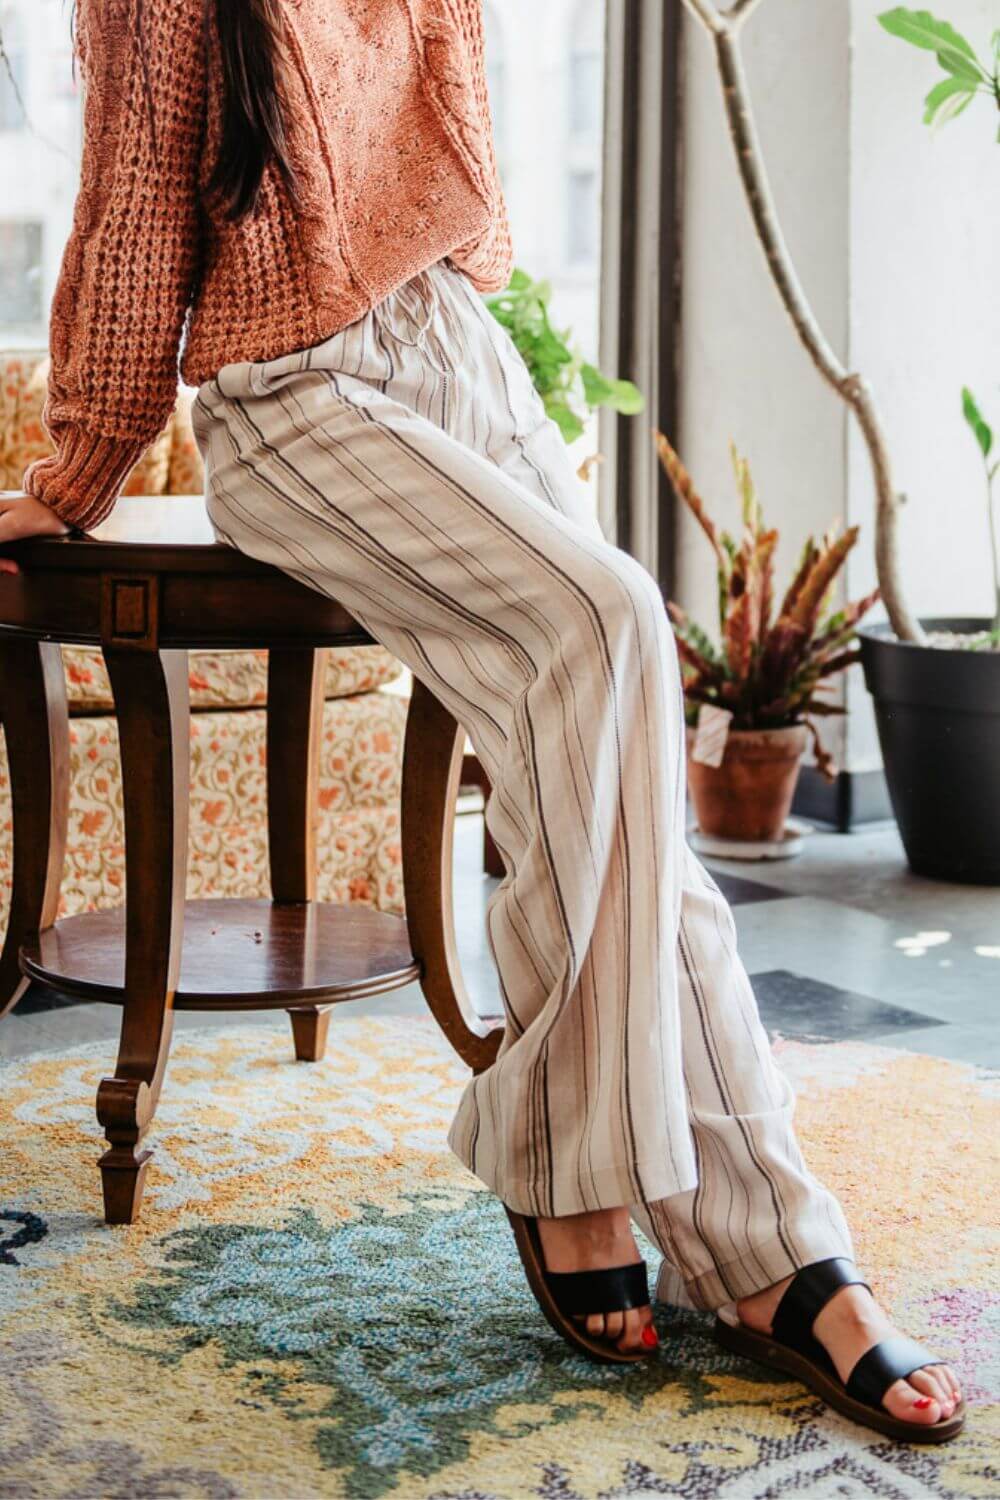 Balmy Linen Blend Beach Pants by Endless Online, THE ICONIC